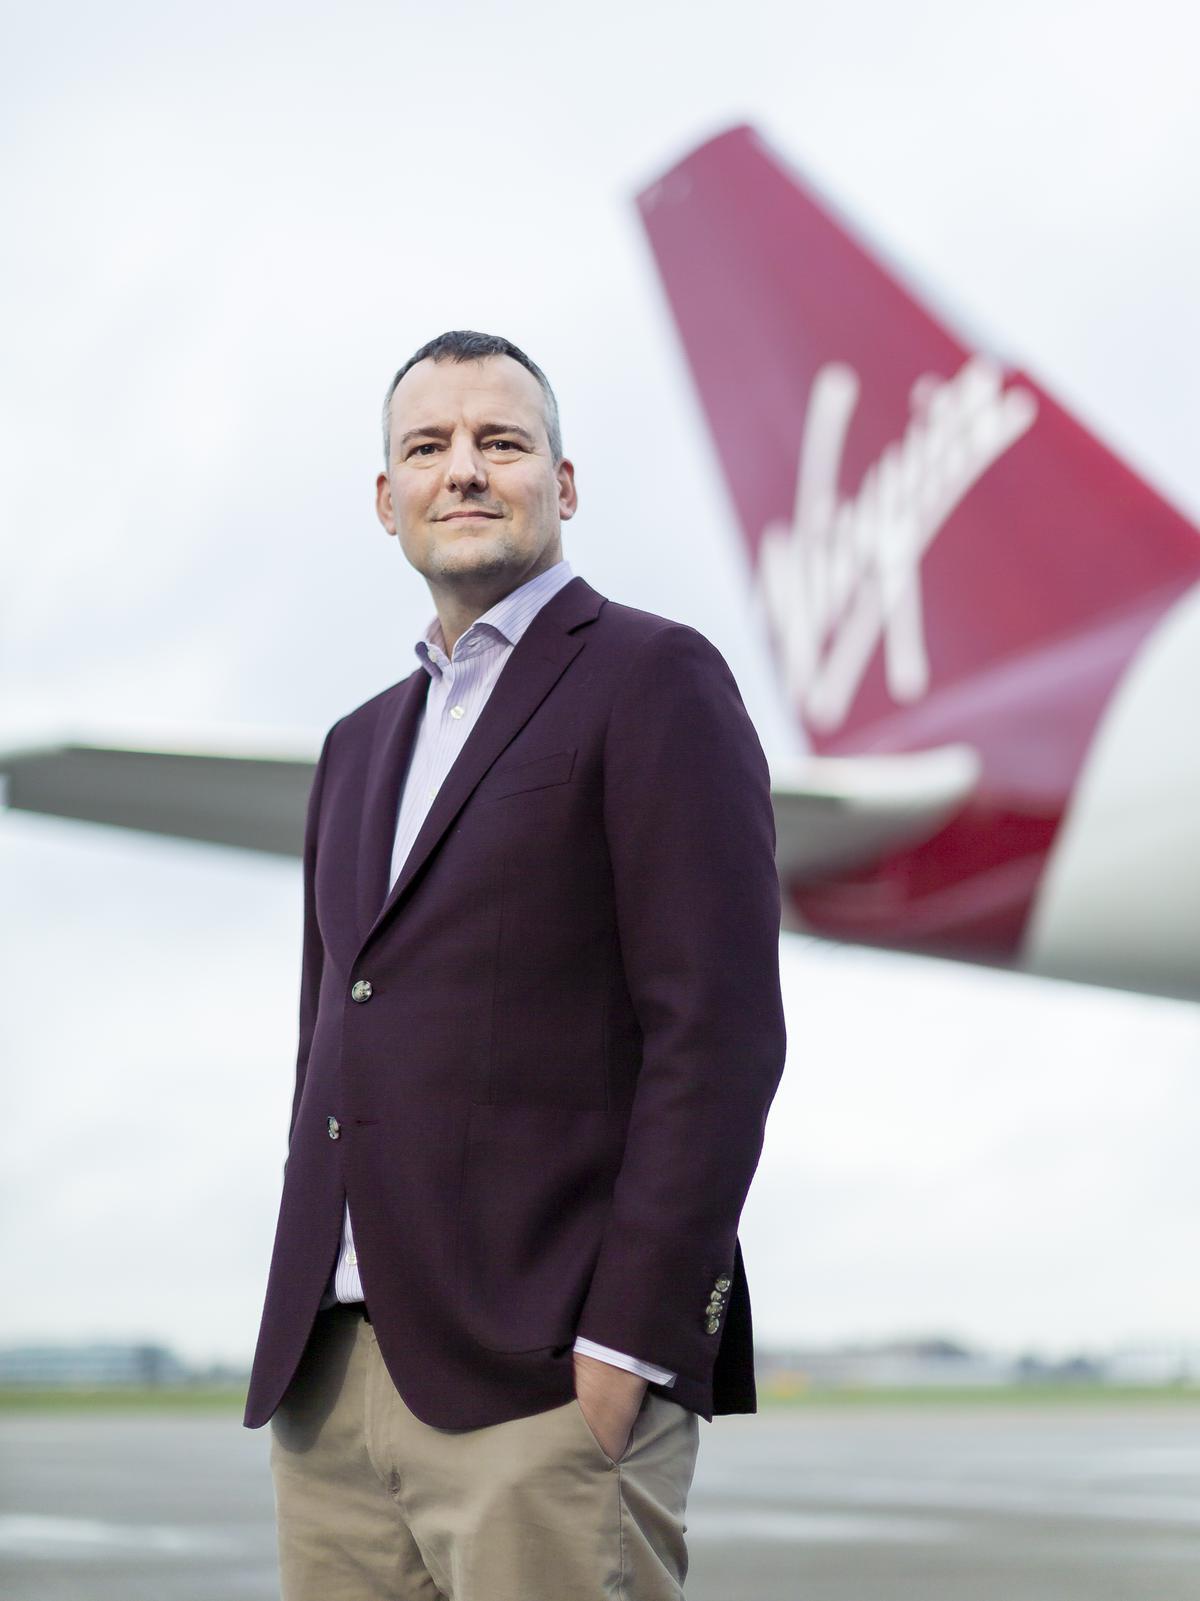 Corneel Koster, Chief Customer & Operating Officer at Virgin Atlantic pictured with Airbus A350 Aircraft at Heathrow Airport.